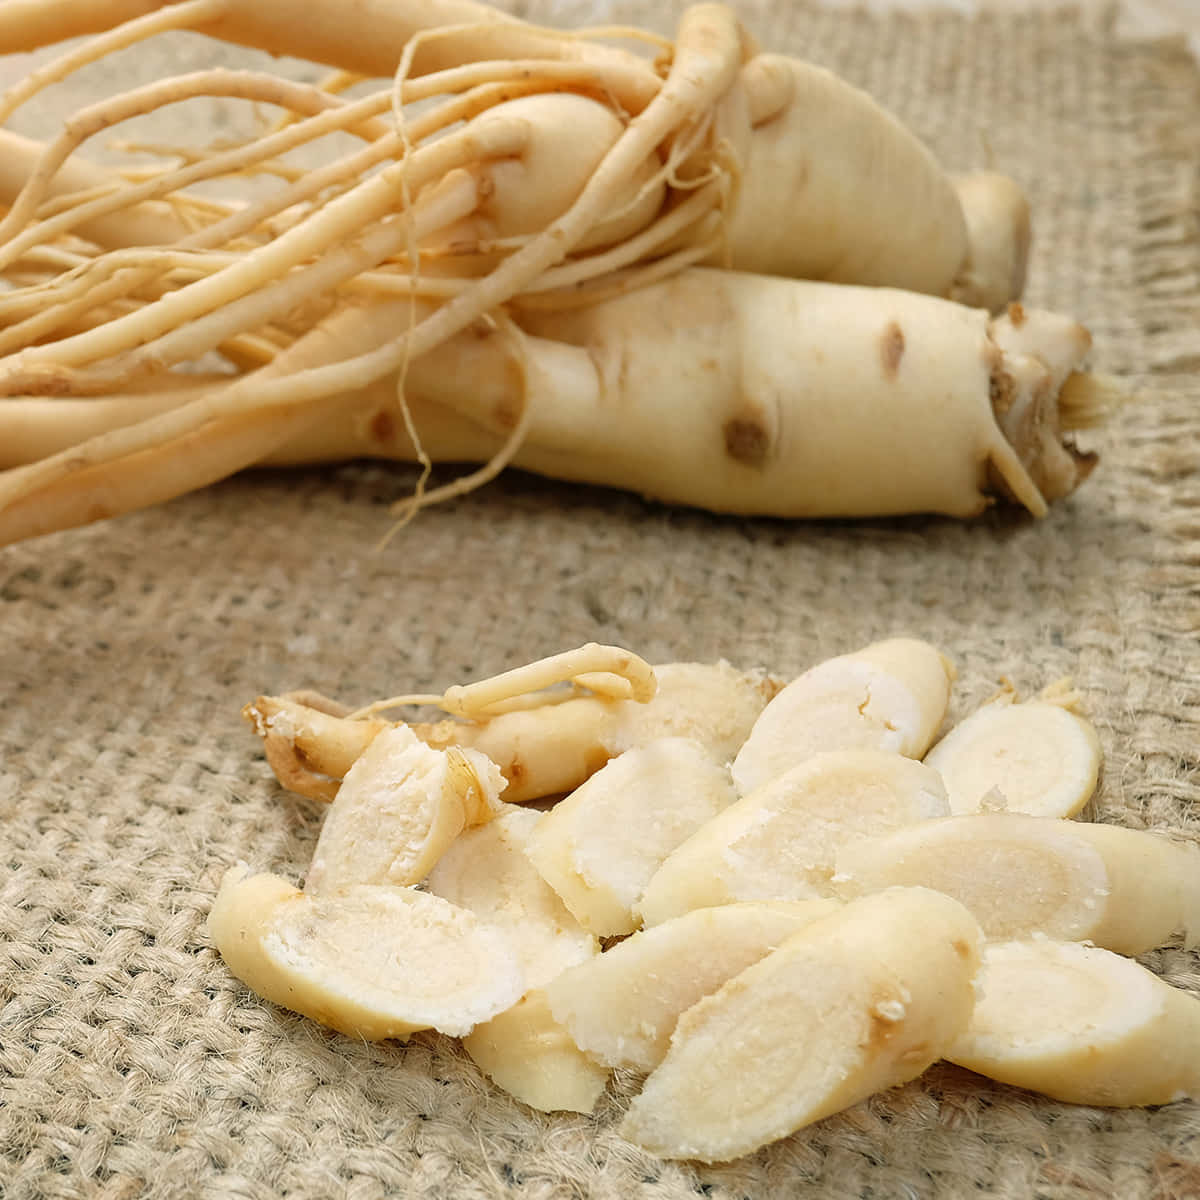 A Bunch Of Ginseng Root And A Piece Of Ginseng